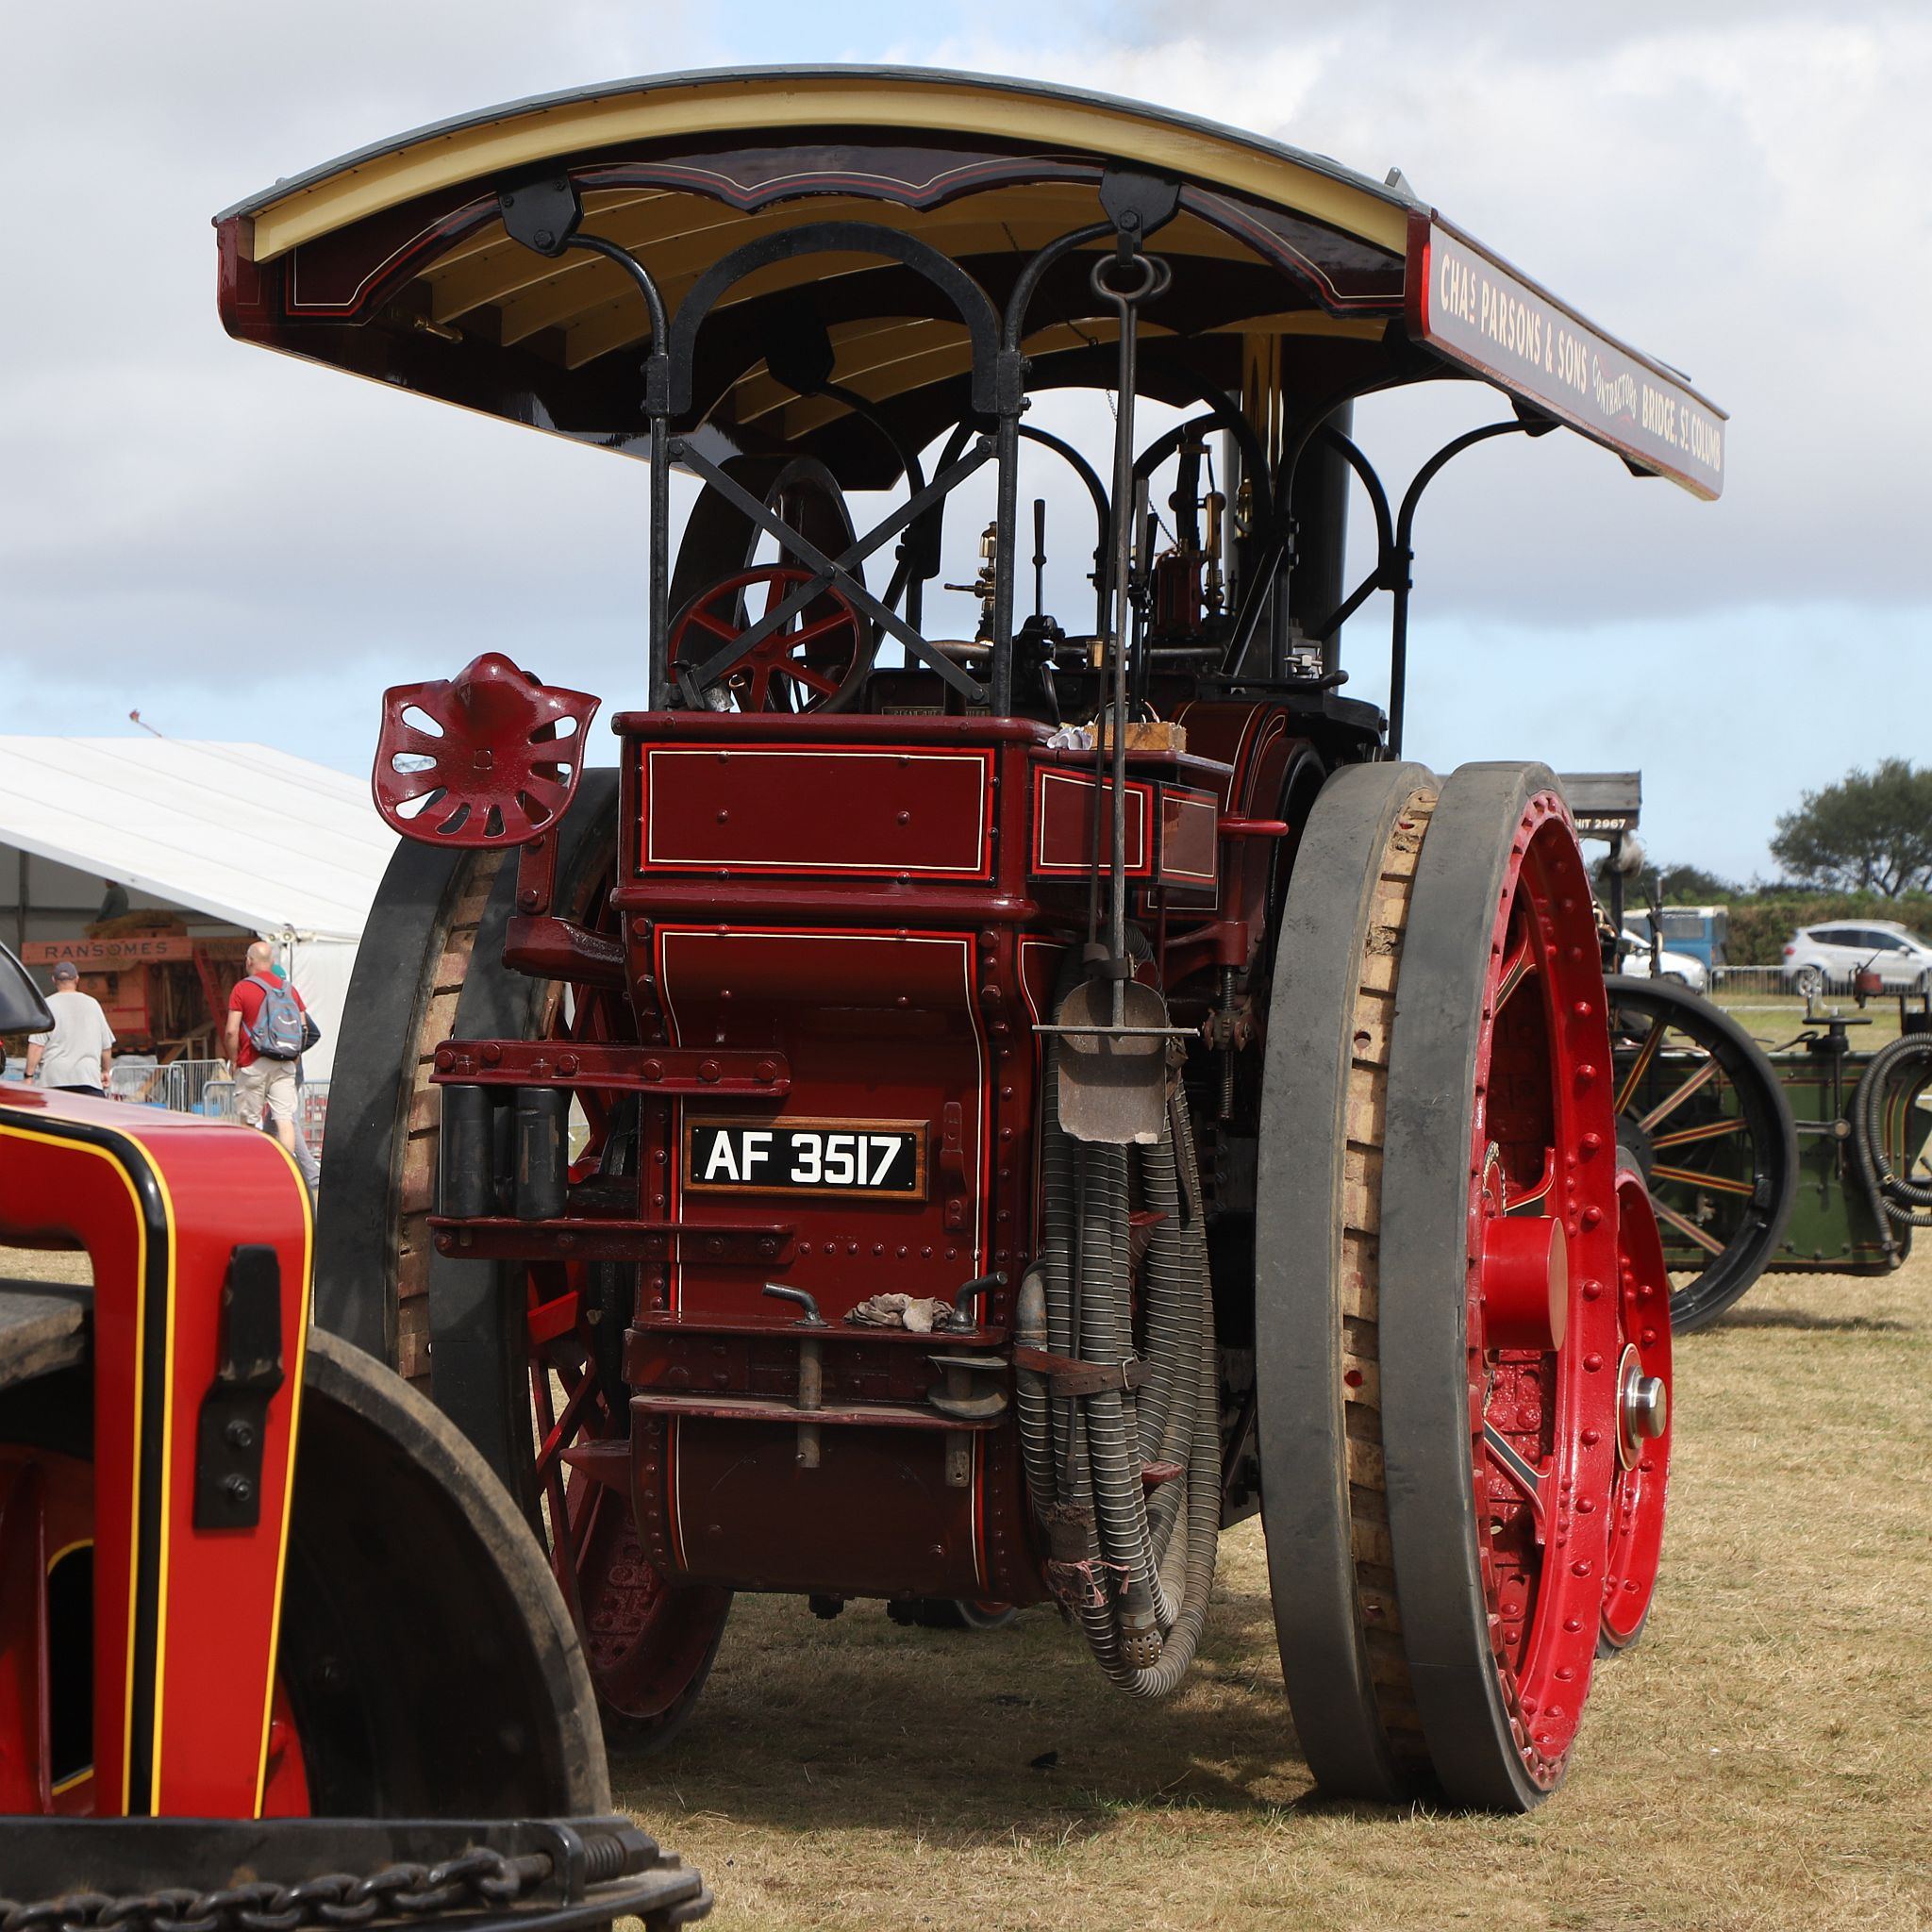 Steam traction engine "Cornishman" AF3517 at a vintage rally in Cornwall. 20-Aug-2022. West of England Steam Engine Society - WESES, Stithians Showground in Truro, Cornwall